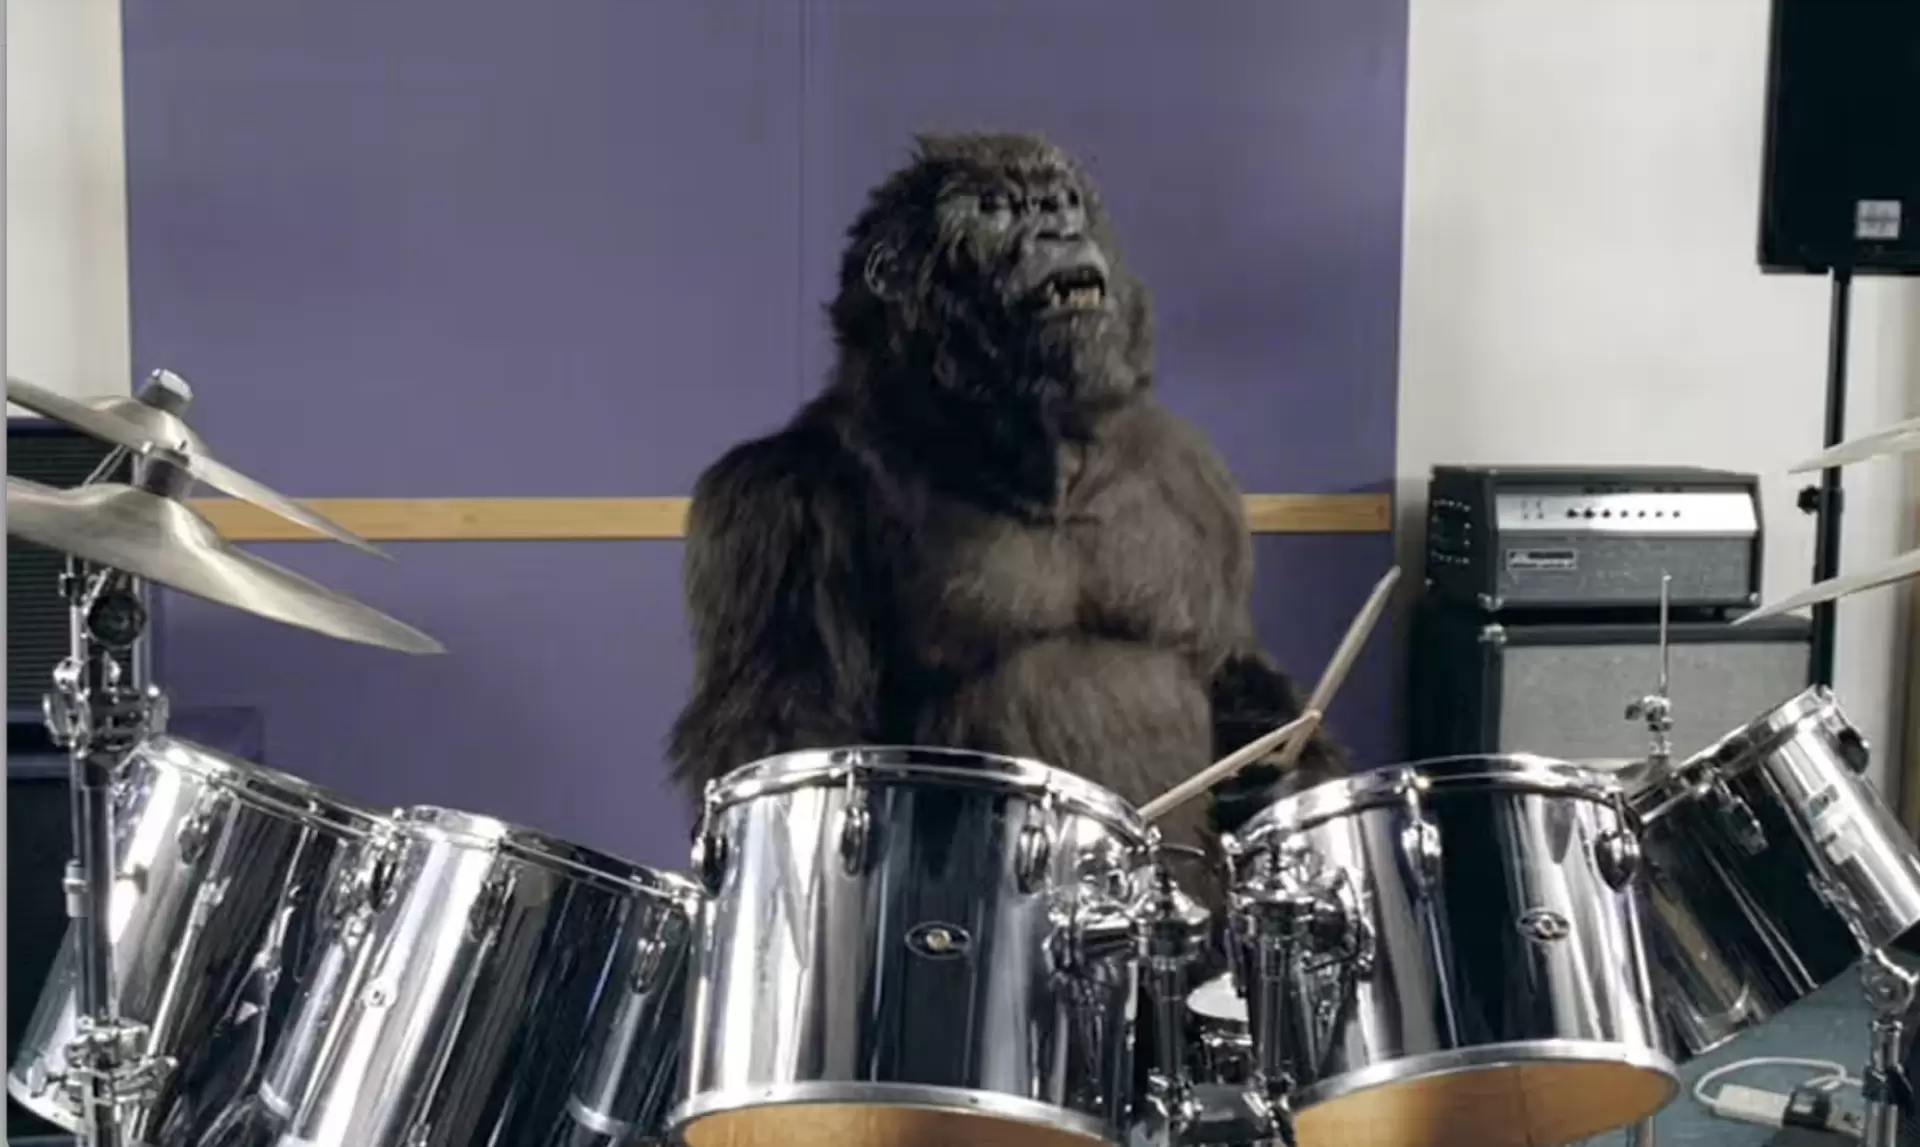 highly creative ad campaign with Gorilla by Cadbury